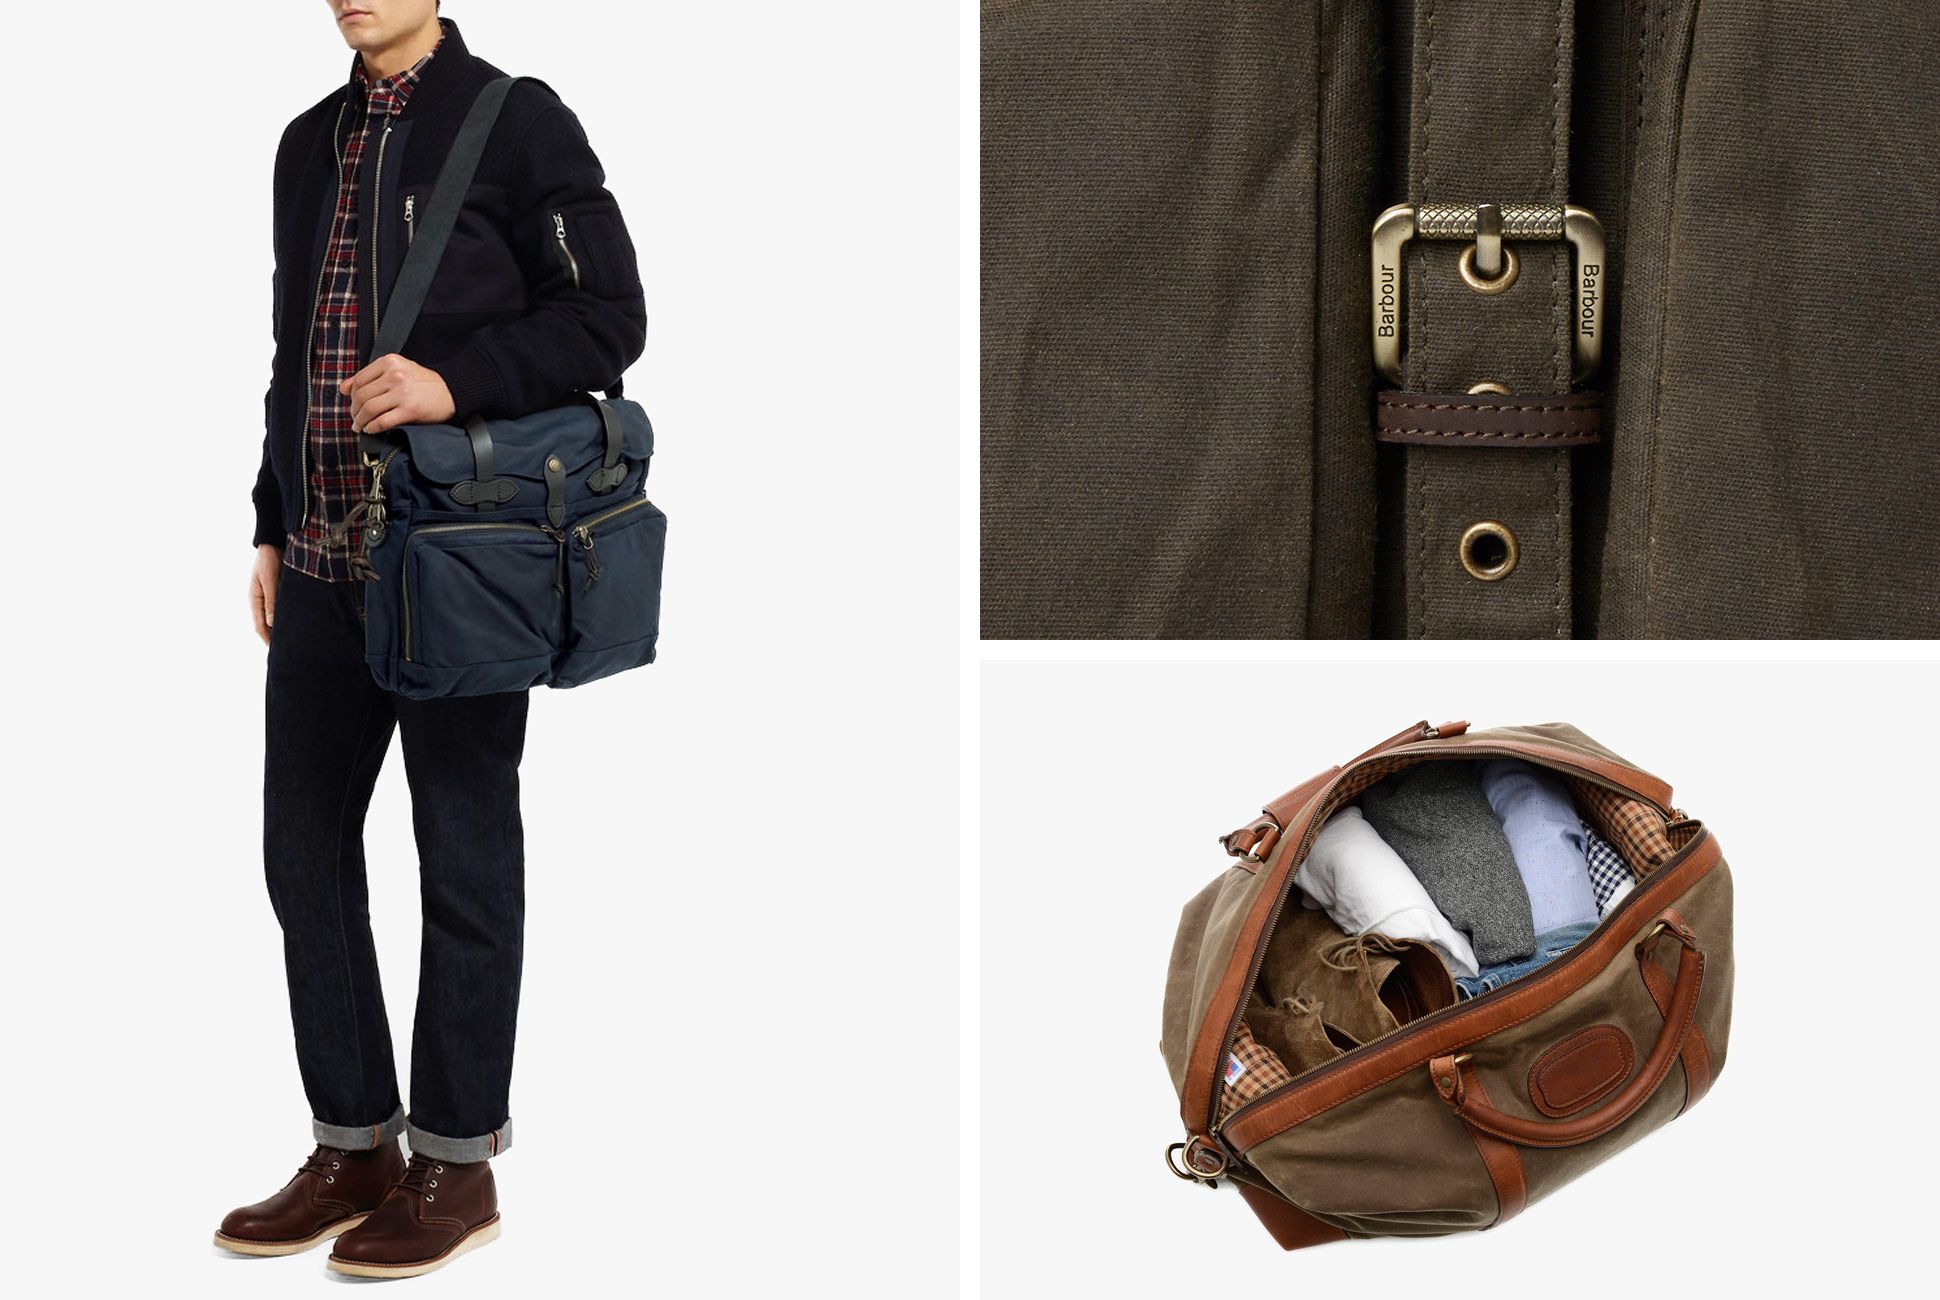 10 Canvas Laptop Bags That Are Stylish and Professional